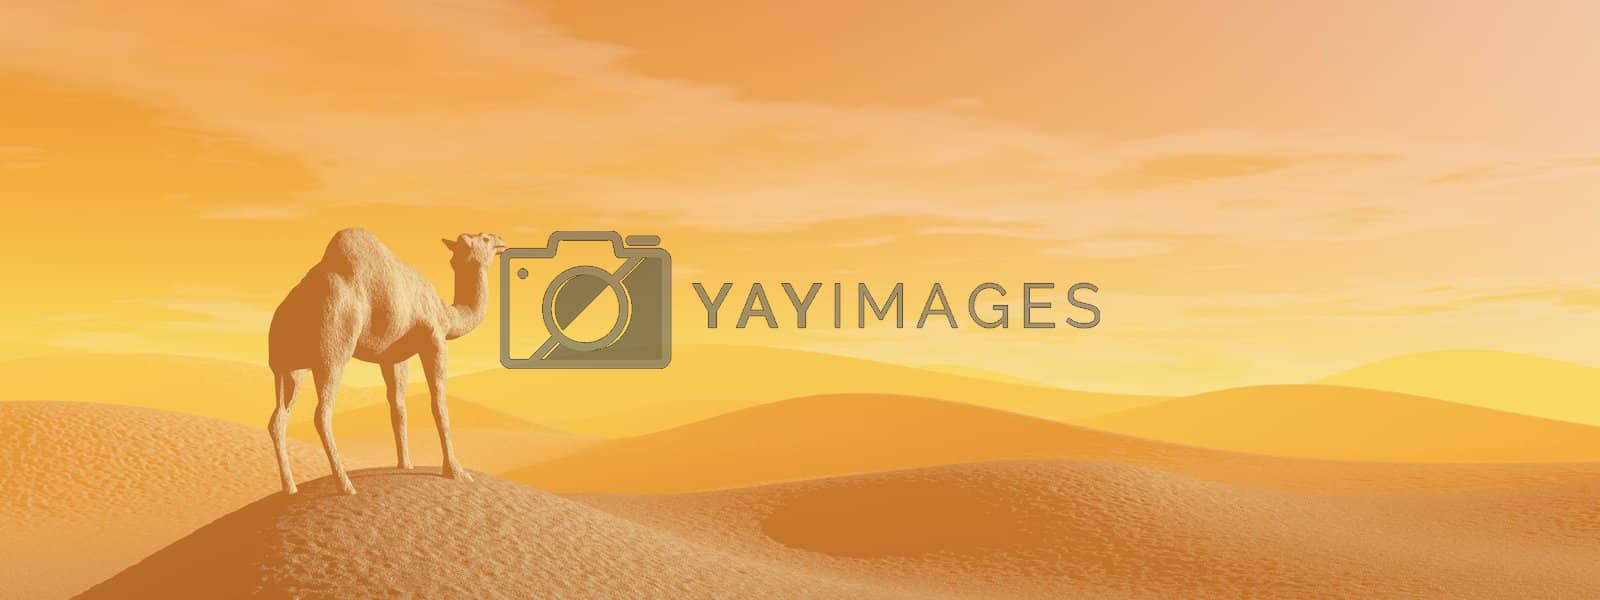 Royalty free image of Camel in the desert - 3D render by Elenaphotos21